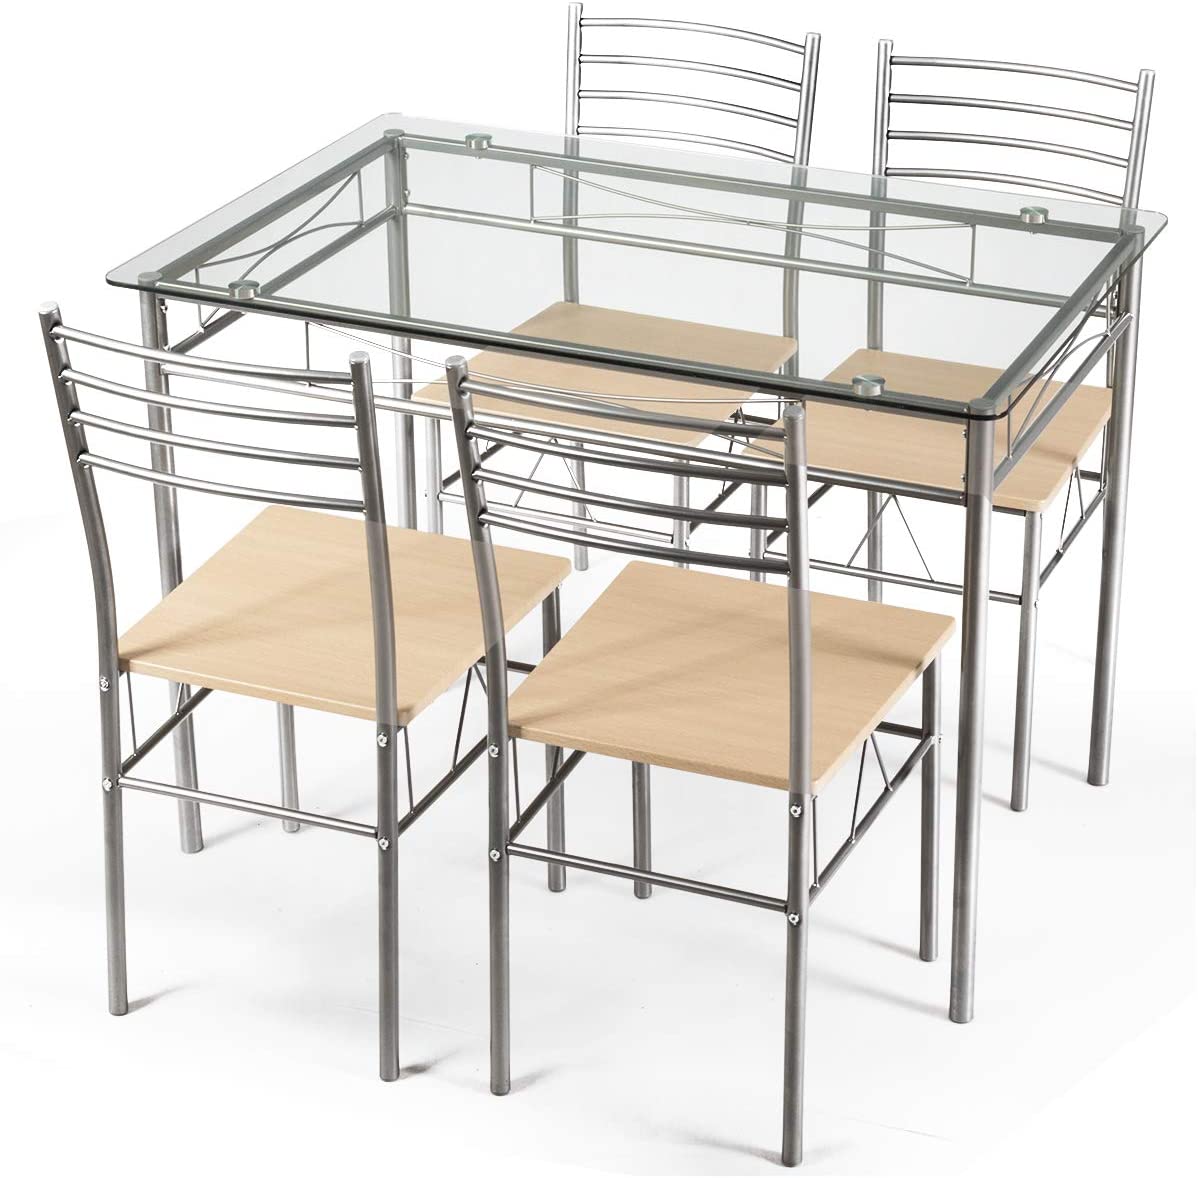 Giantex 5 Piece Dining Table Set, Kitchen Dining Set with Tempered Glass Table Top and 4 Chairs